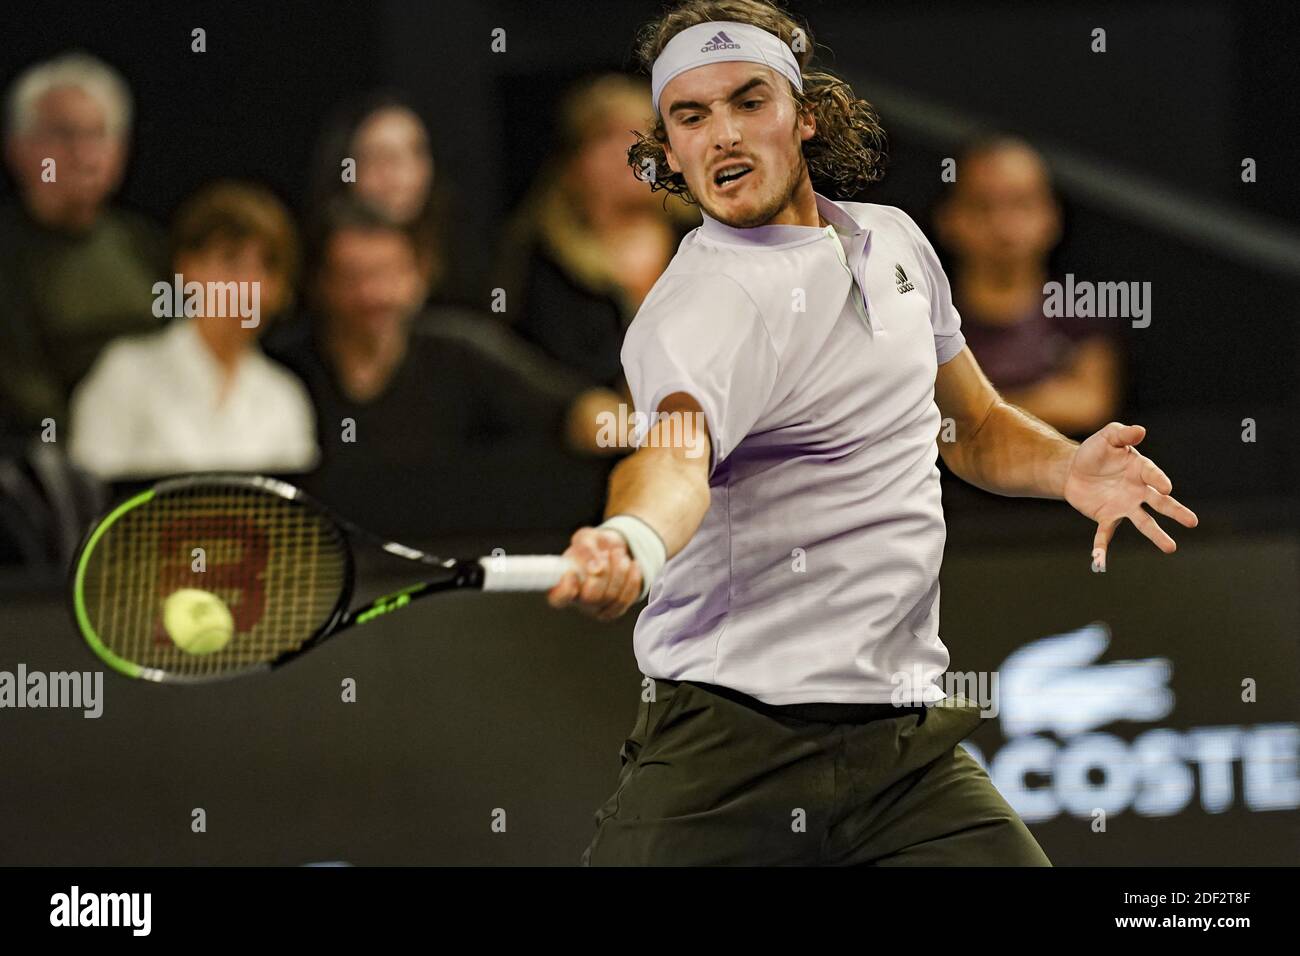 Stefanos Tsitsipas (GRE) during the Open 13 Provence ATP 250 final between  Stefanos Tsitsipas vs Felix Auger-Aliassime, in Marseille, France on  February 23, 2020. Photo by Julien Poupart/ABACAPRESS.COM Stock Photo -  Alamy